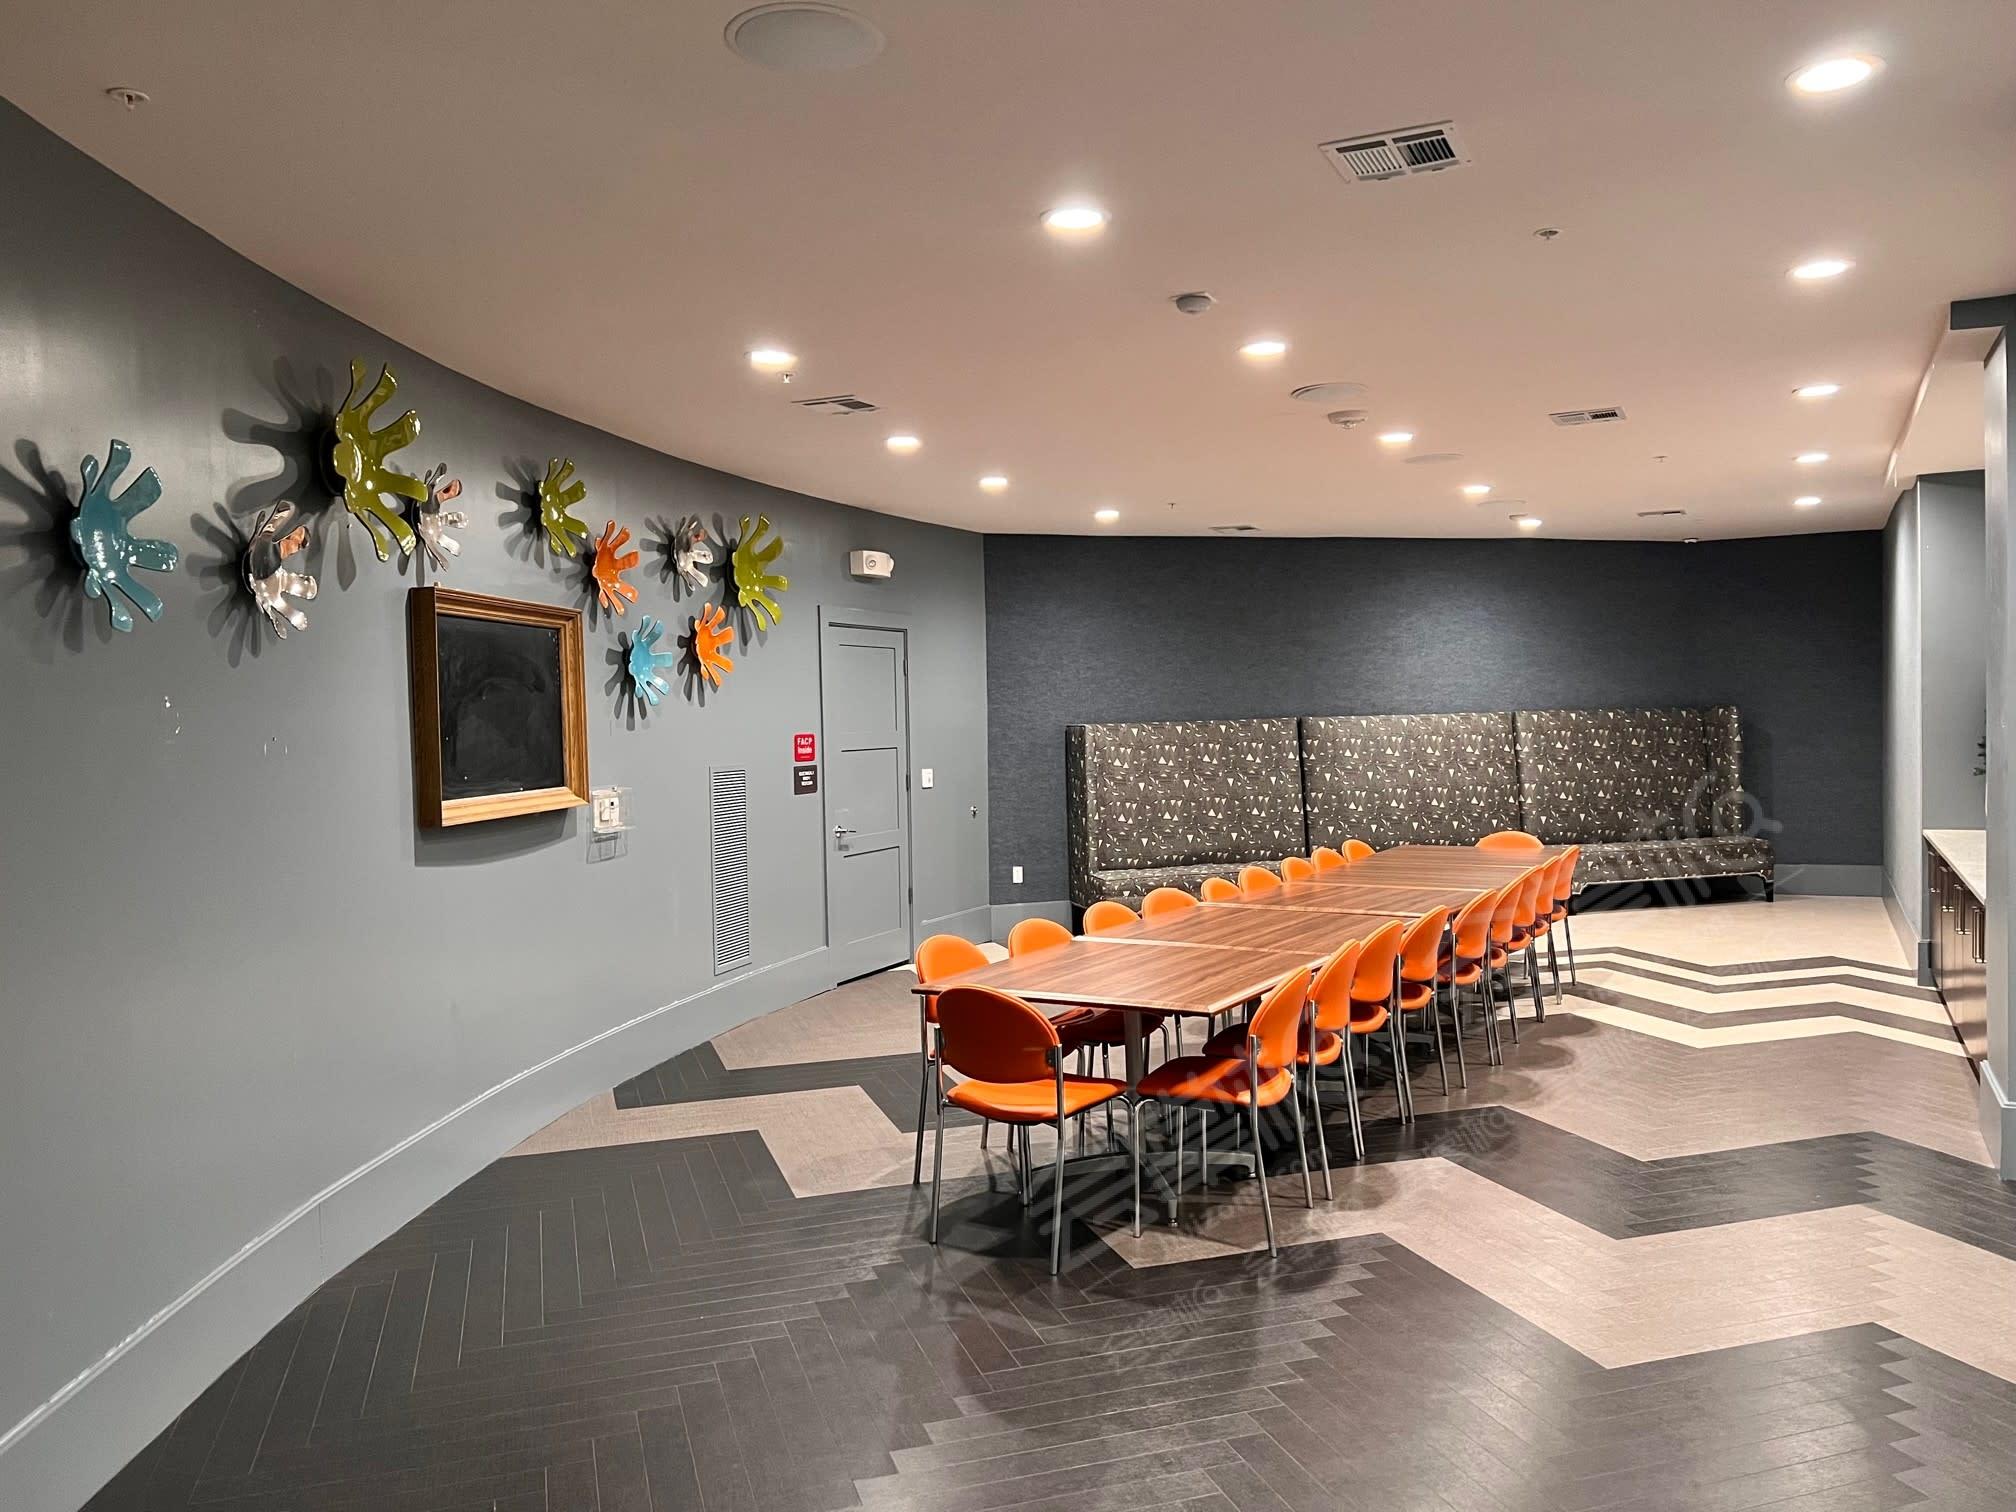 Colorful Multipurpose Space with Full Kitchen - Perfect for Hosting Events!